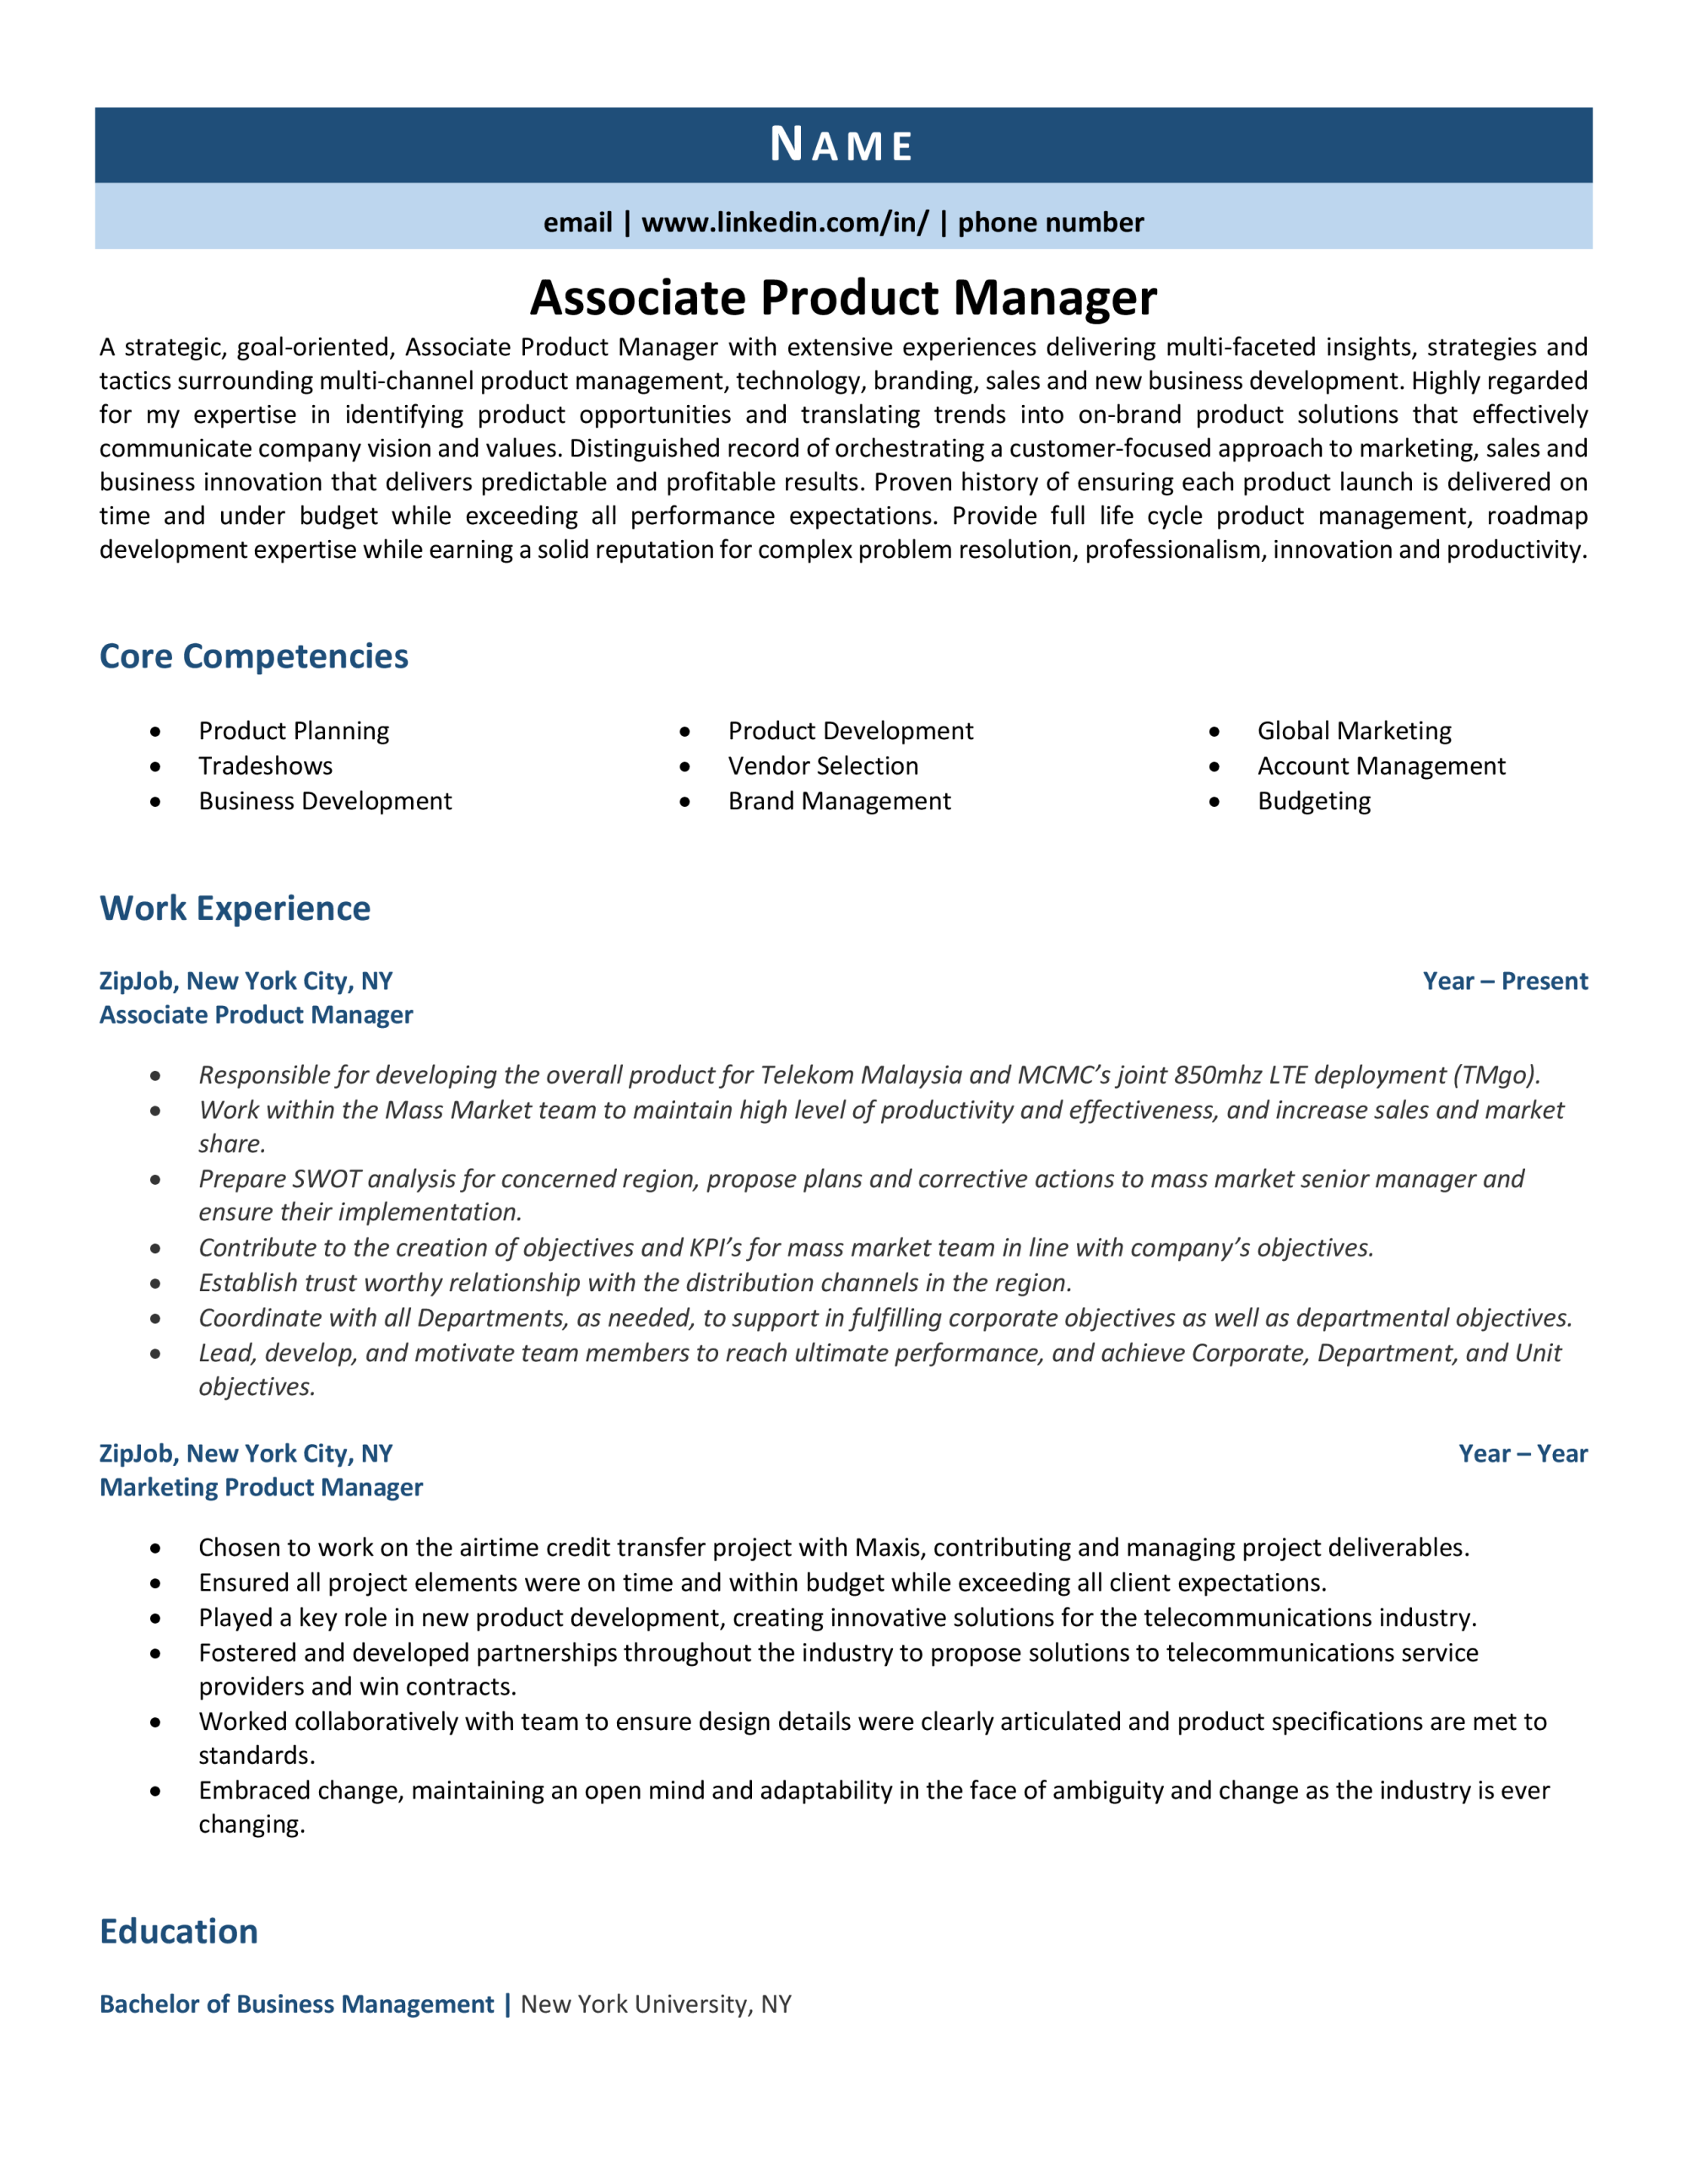 Associate Product Manager Resume Example For 2023 Rez vrogue.co